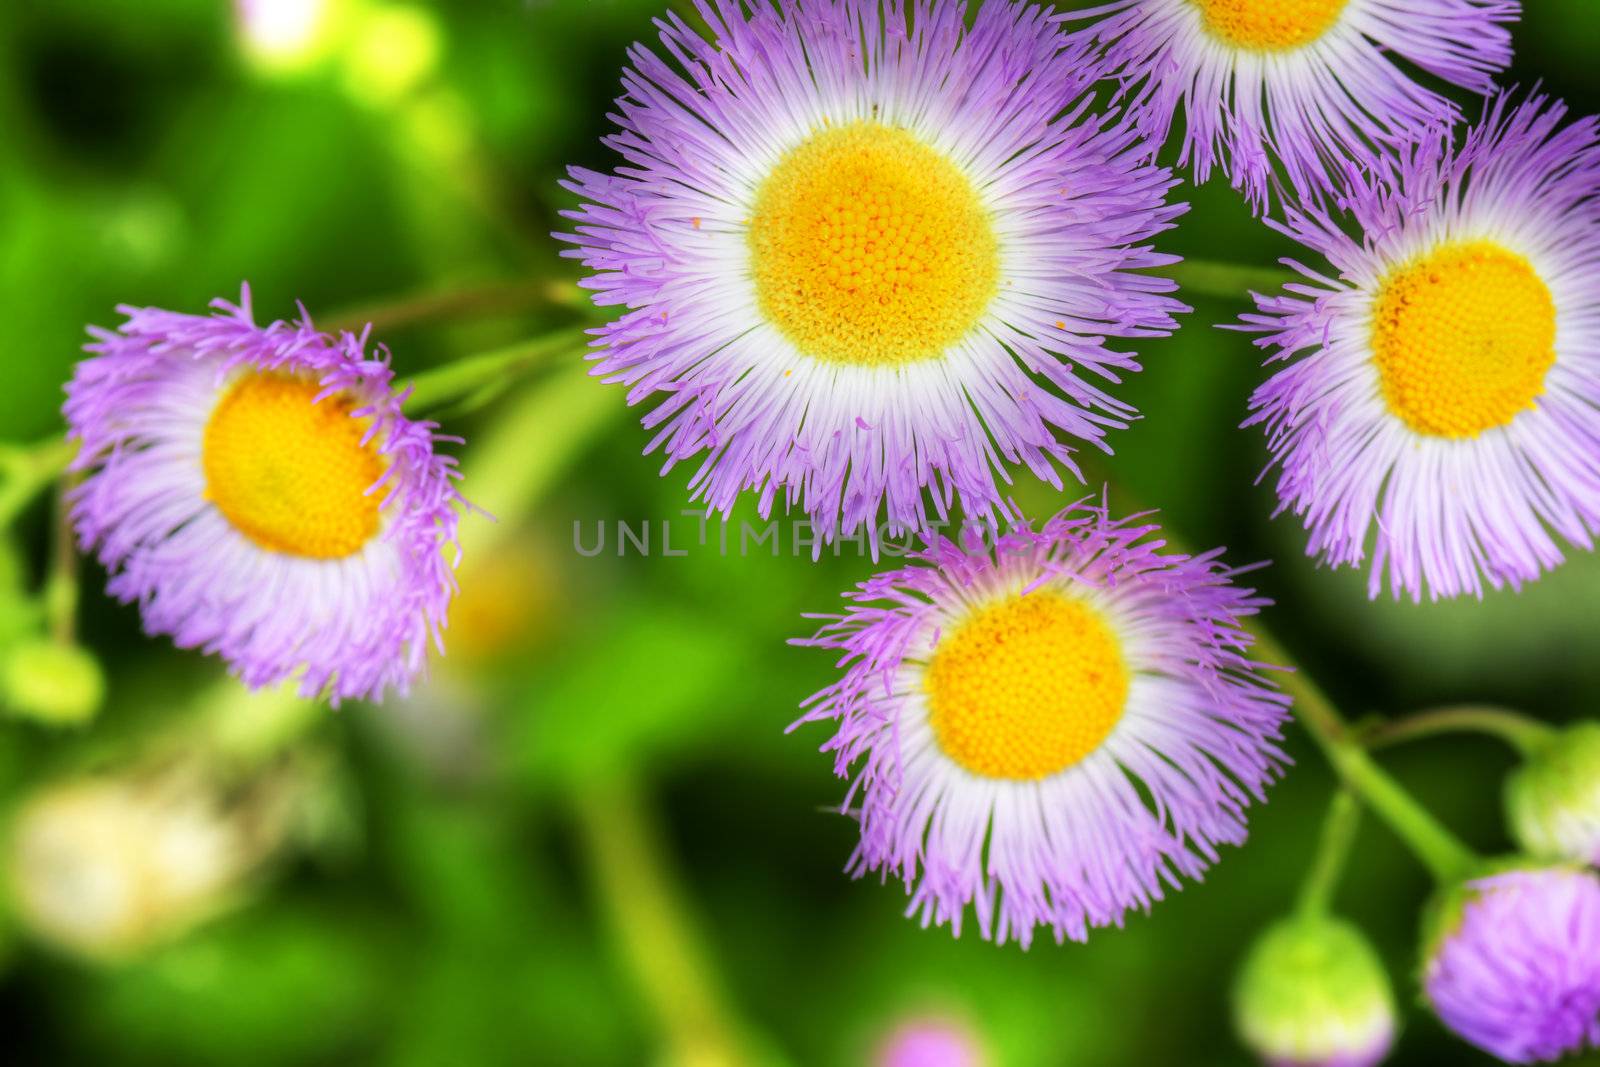 Common fleabane hdr by Mirage3